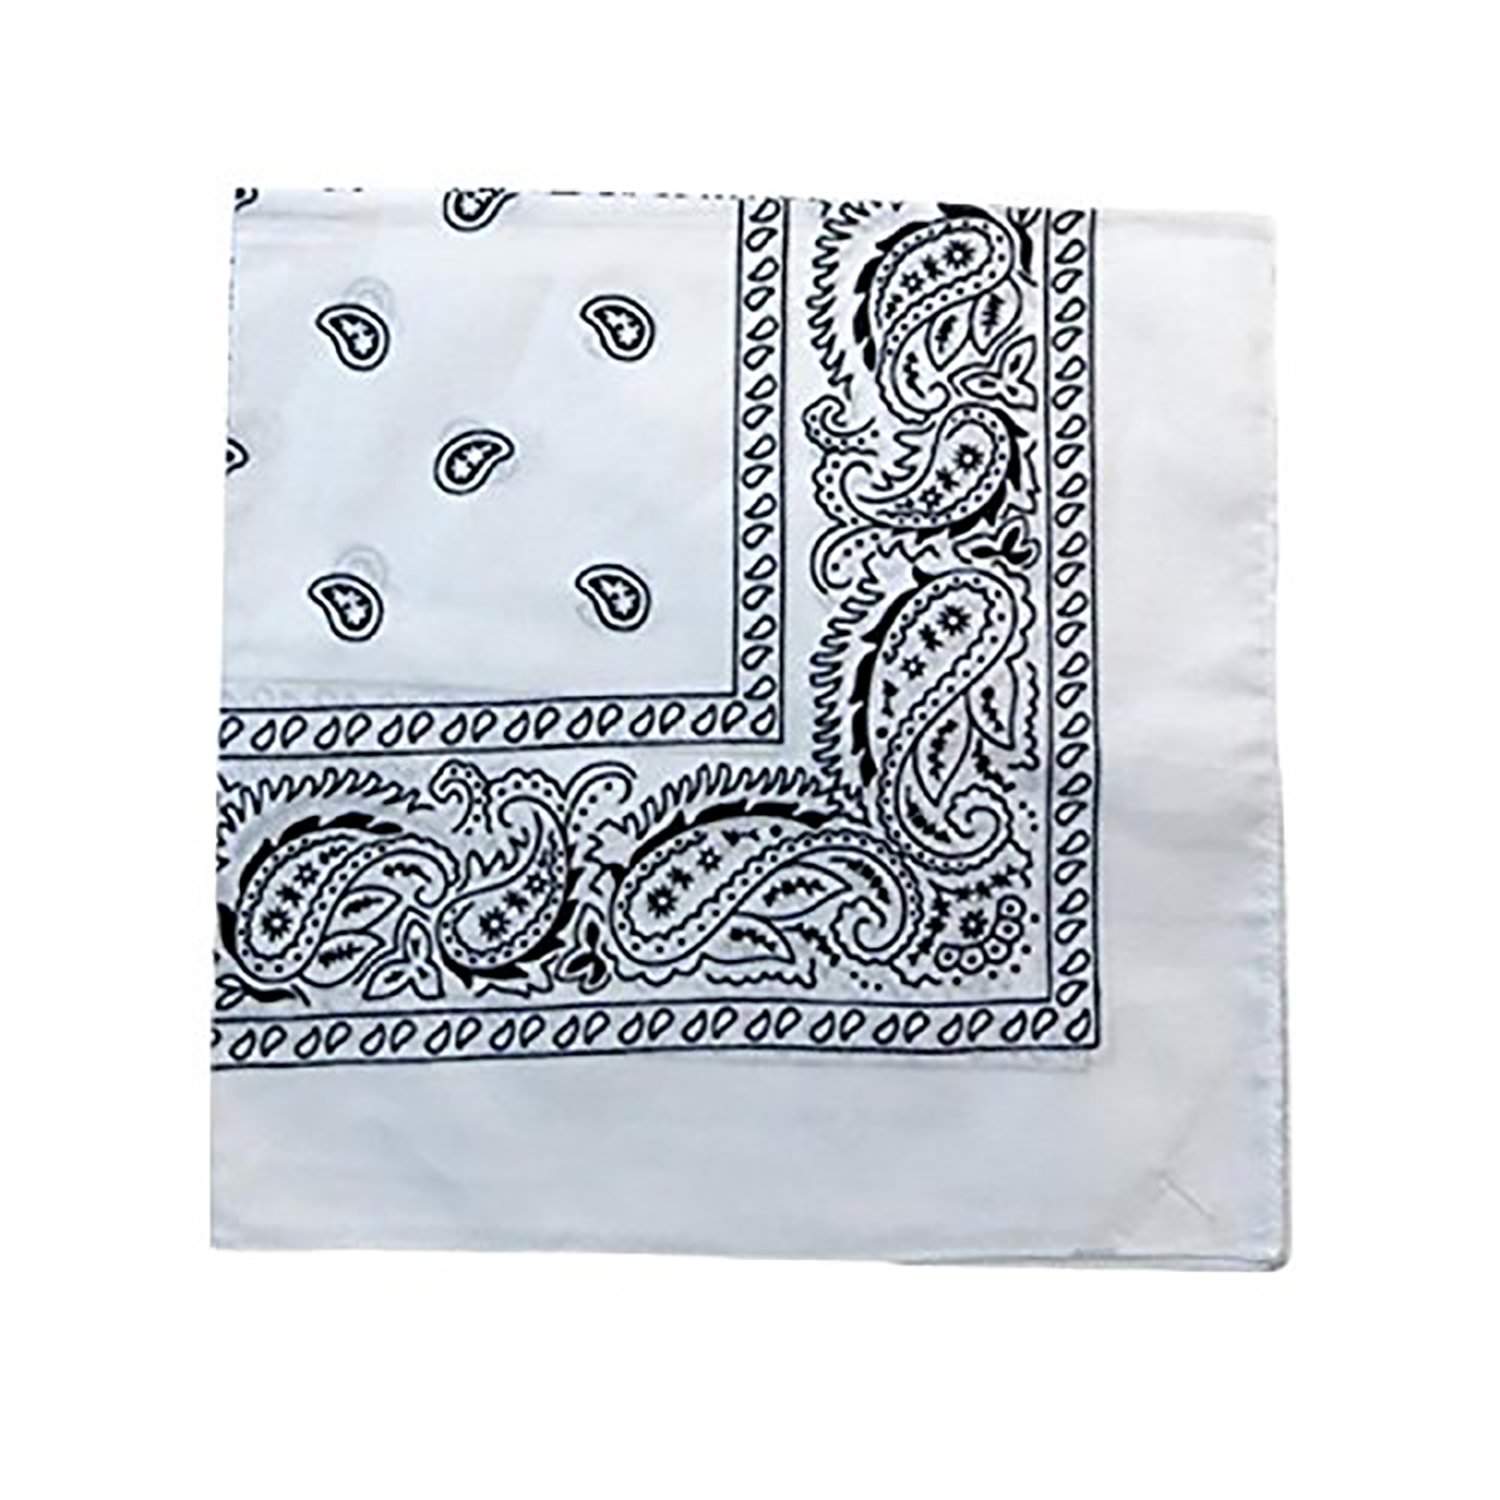 Pack of 36 XL Non Fading Paisley Polyester Bandanas 27 x 27 In - Bulk Wholesale